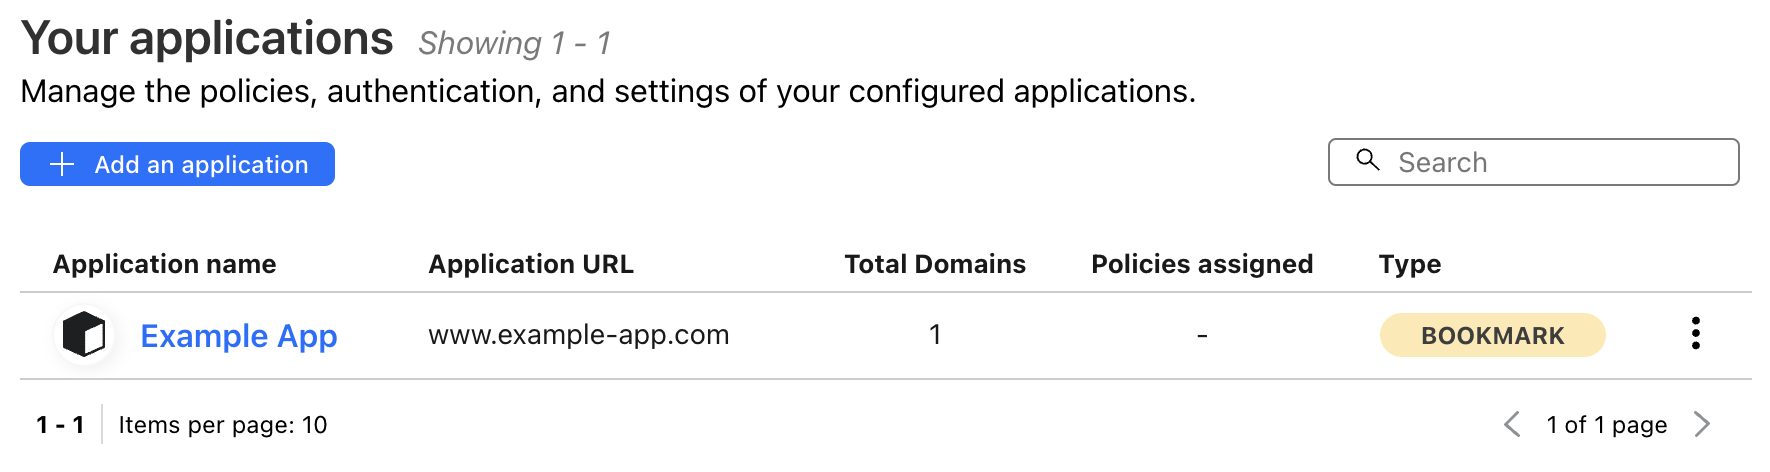 Cloudflare Access Add an Application